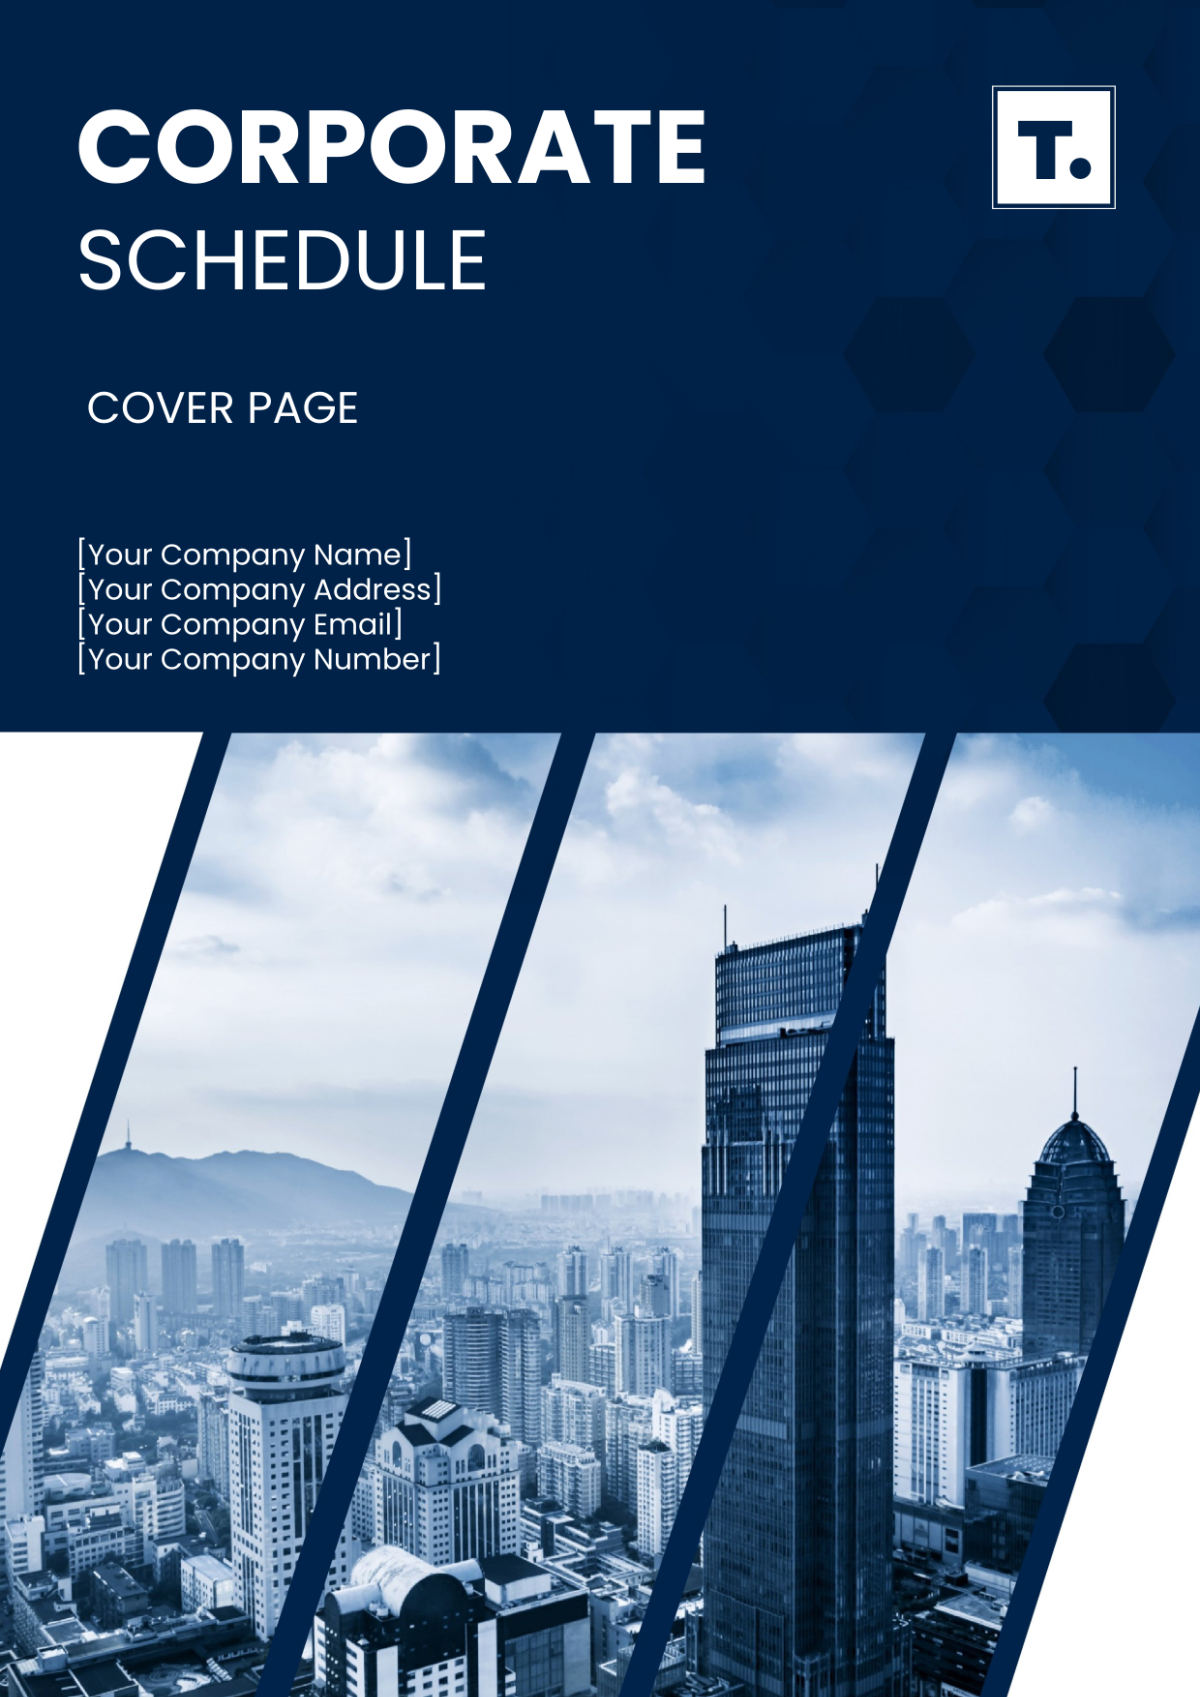 Corporate Schedule Cover Page